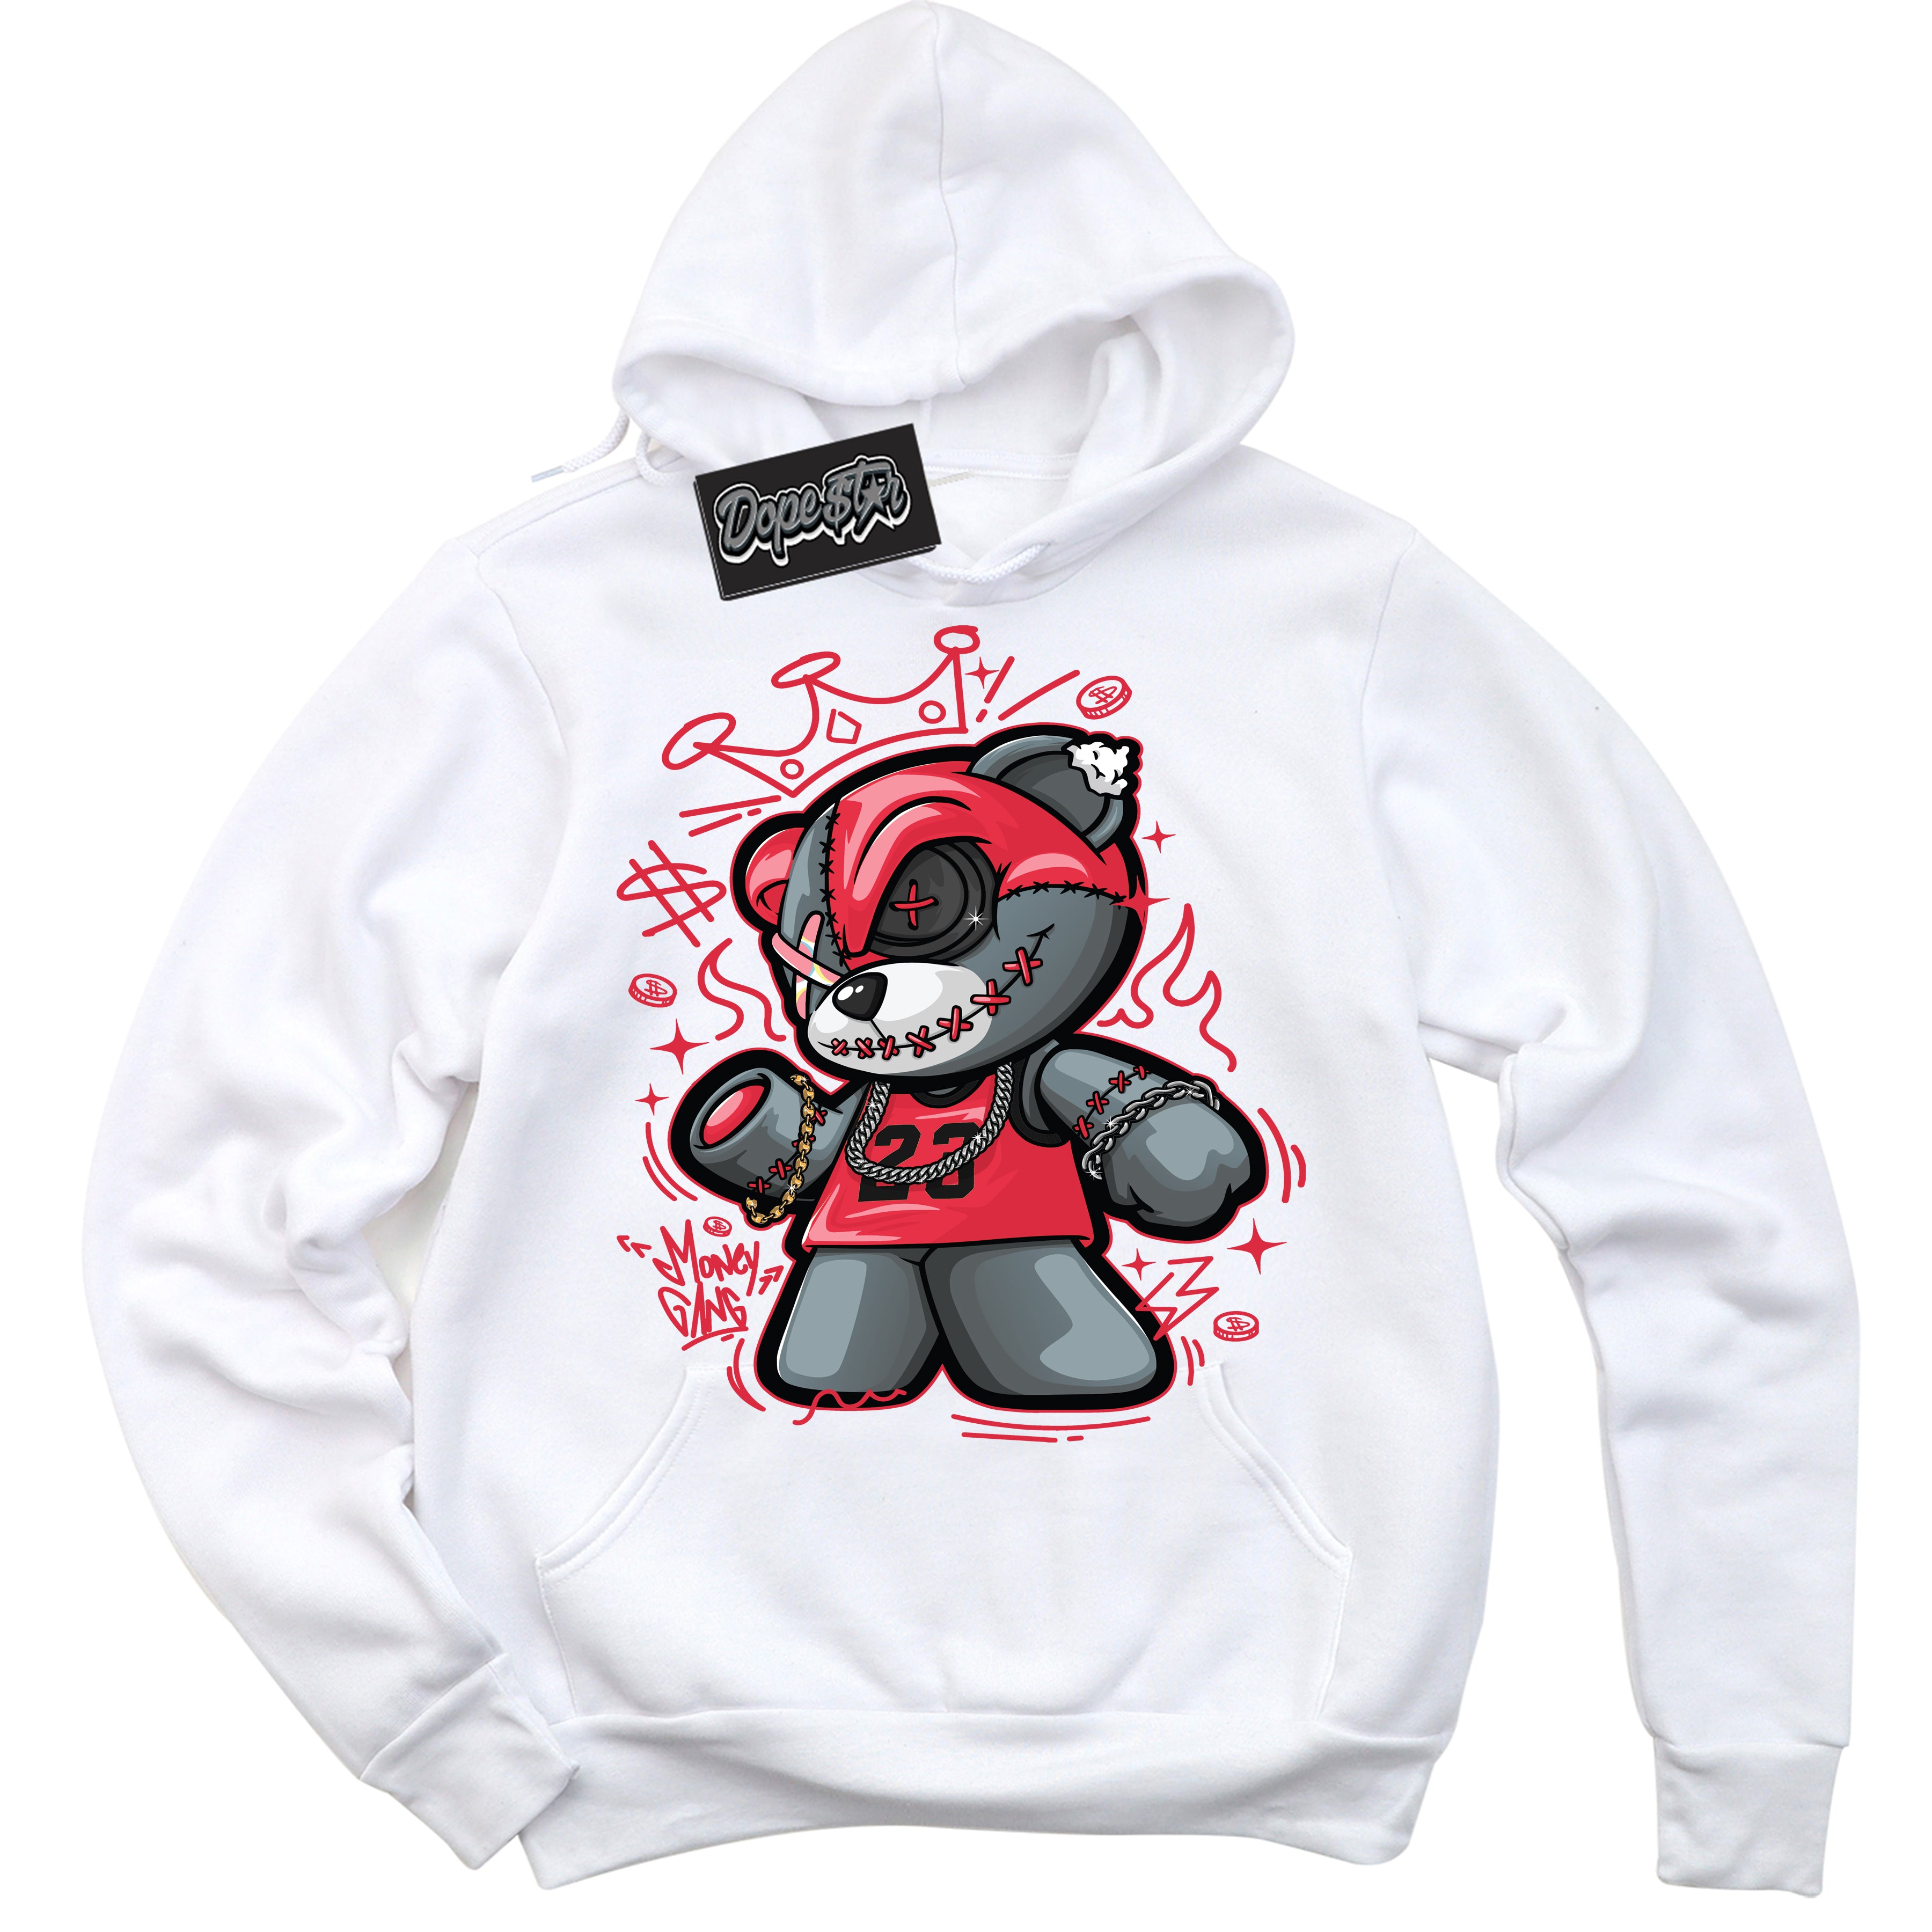 Cool White Graphic DopeStar Hoodie with “ Money Gang Bear “ print, that perfectly matches Spider-Verse 1s sneakers